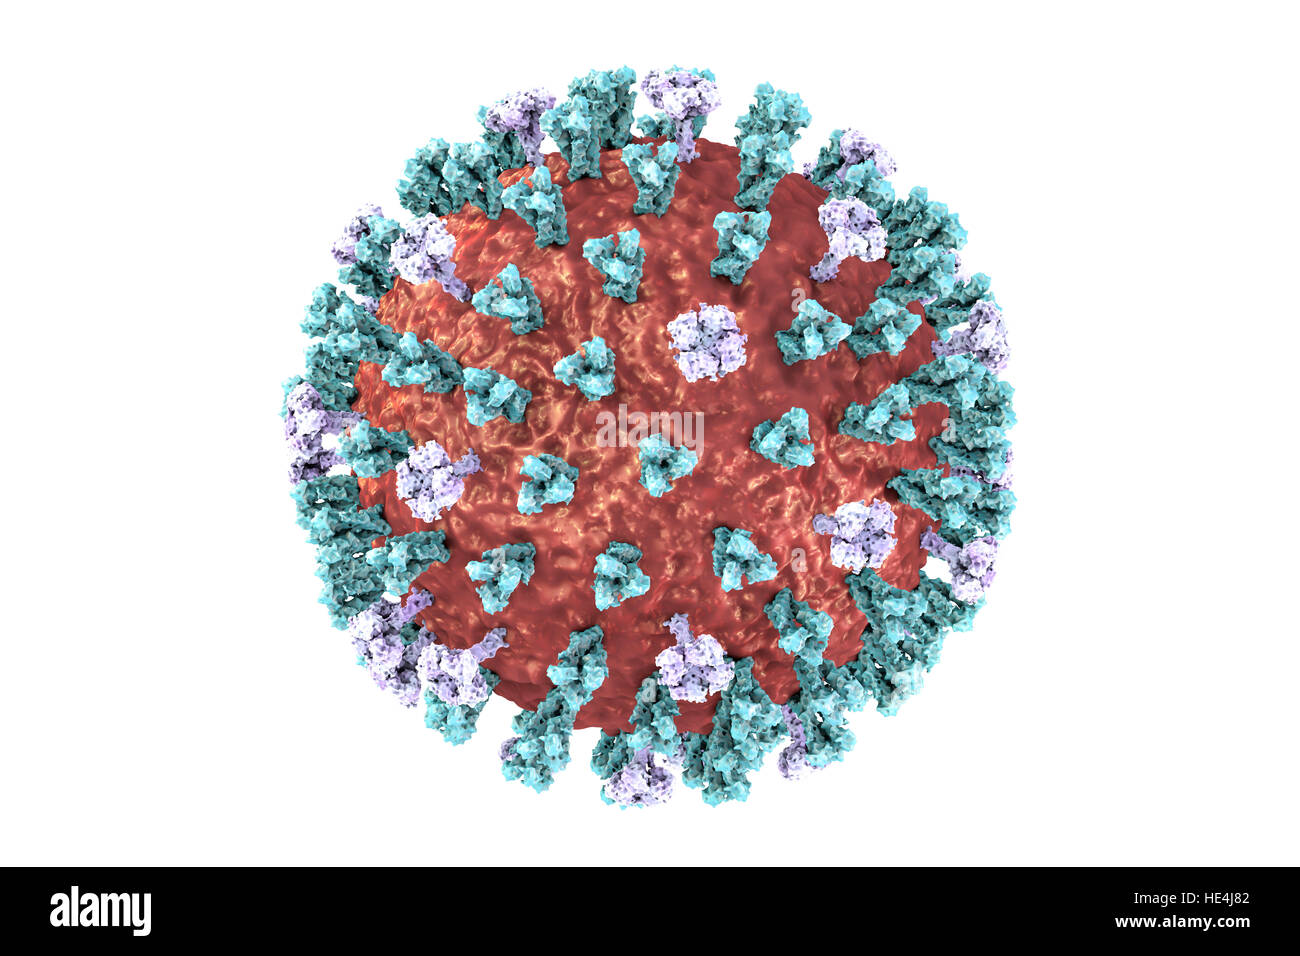 Bird flu virus. 3D illustration of an avian influenza H5N8 virus particle. Within the viral lipid envelope (red) are two types of protein spike, hemagglutinin (H, blue) and neuraminidase (N, purple), which determine the strain of virus. This strain of the virus has caused disease in wild birds and poultry in Europe and Asia since June 2016. Unusually, the virus causes mortality in wild birds, which are more often silent carriers. As of December 2016 no human cases of the disease have been reported, and risk of transmission to humans is thought to be low. Stock Photo